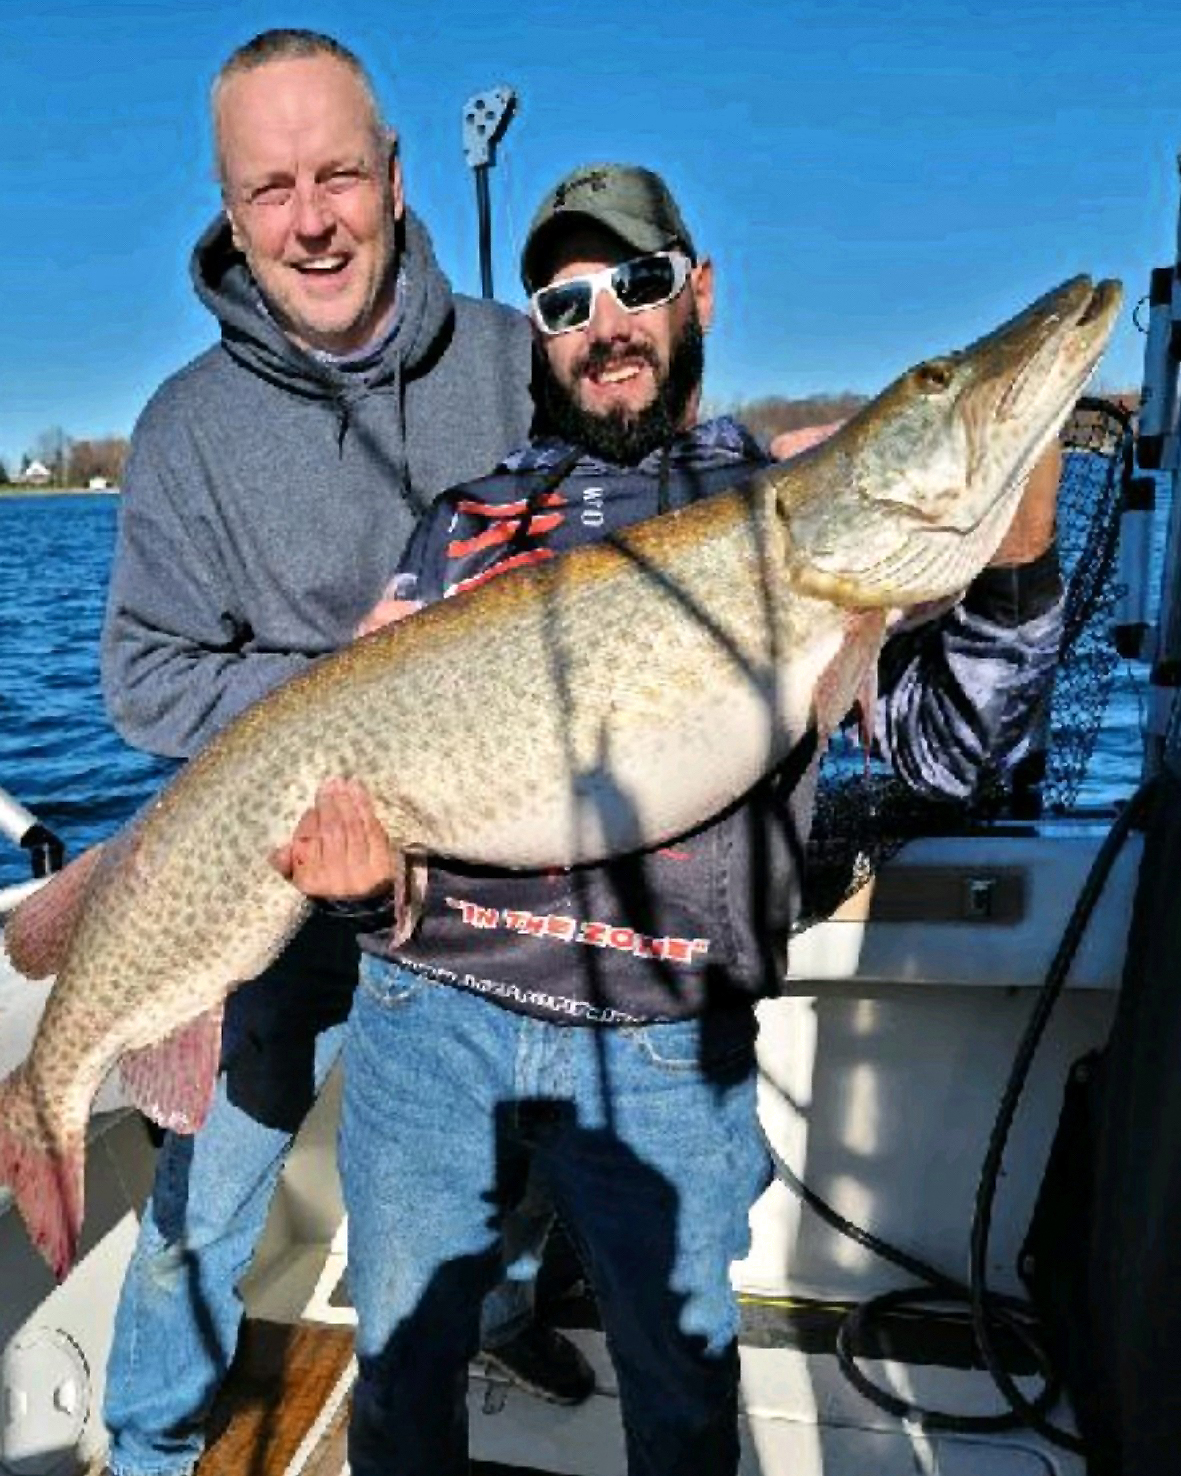 Fellows Lake yields another giant muskie — on a fly rod